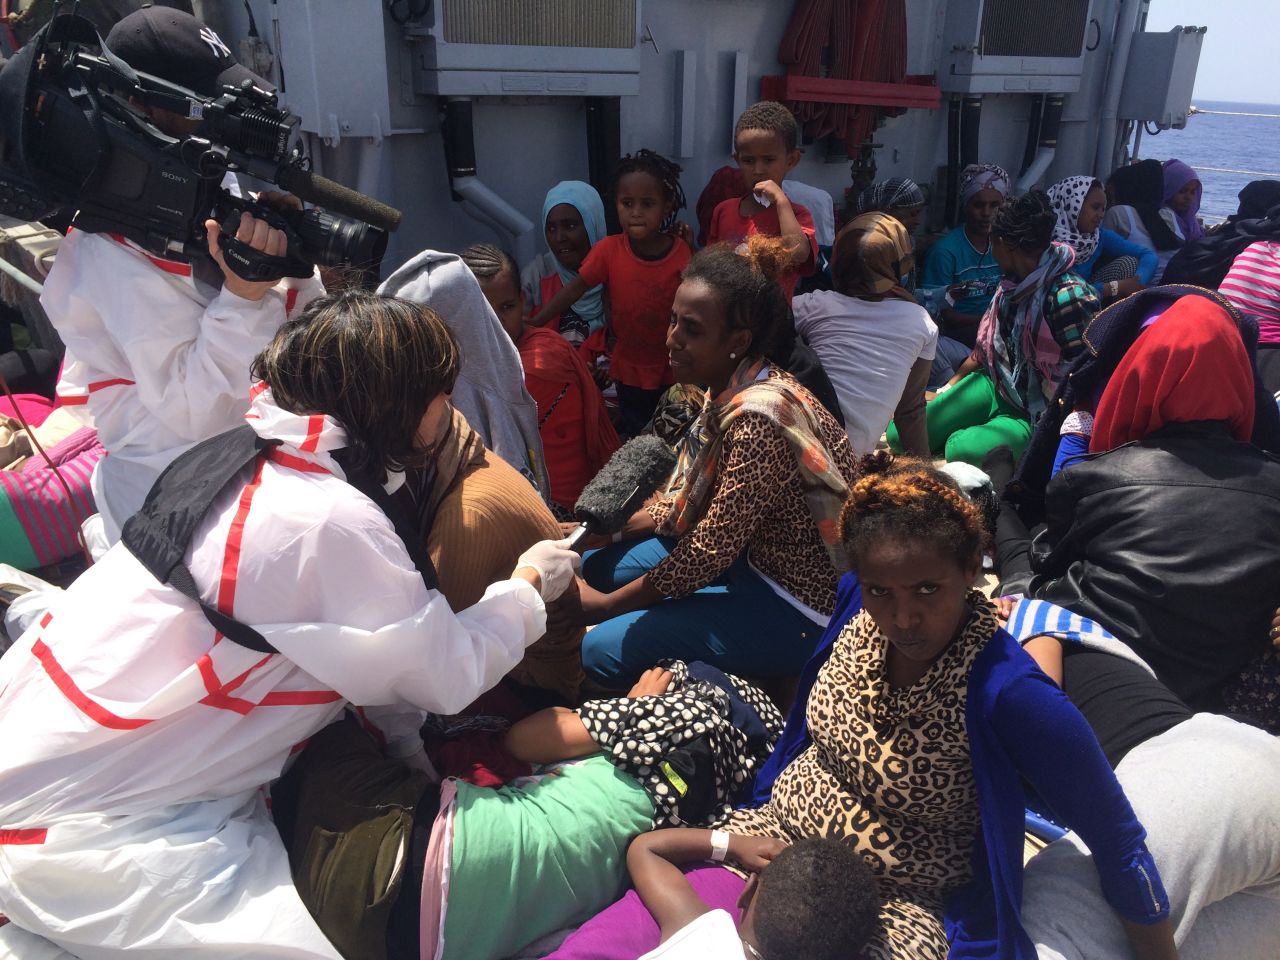 Amanpour speaks with migrants, almost all from Eritrea, onboard the Sfinge.<br /><br />Tens of thousands of migrants have attempted the perilous journey across the Mediterranean this year, and at least 1,826 have died, <a href="http://www.iom.int/news/iom-welcomes-european-commission-proposals-migration" target="_blank" target="_blank">according to the International Organization for Migration</a>, many times more than had perished during the same period last year.